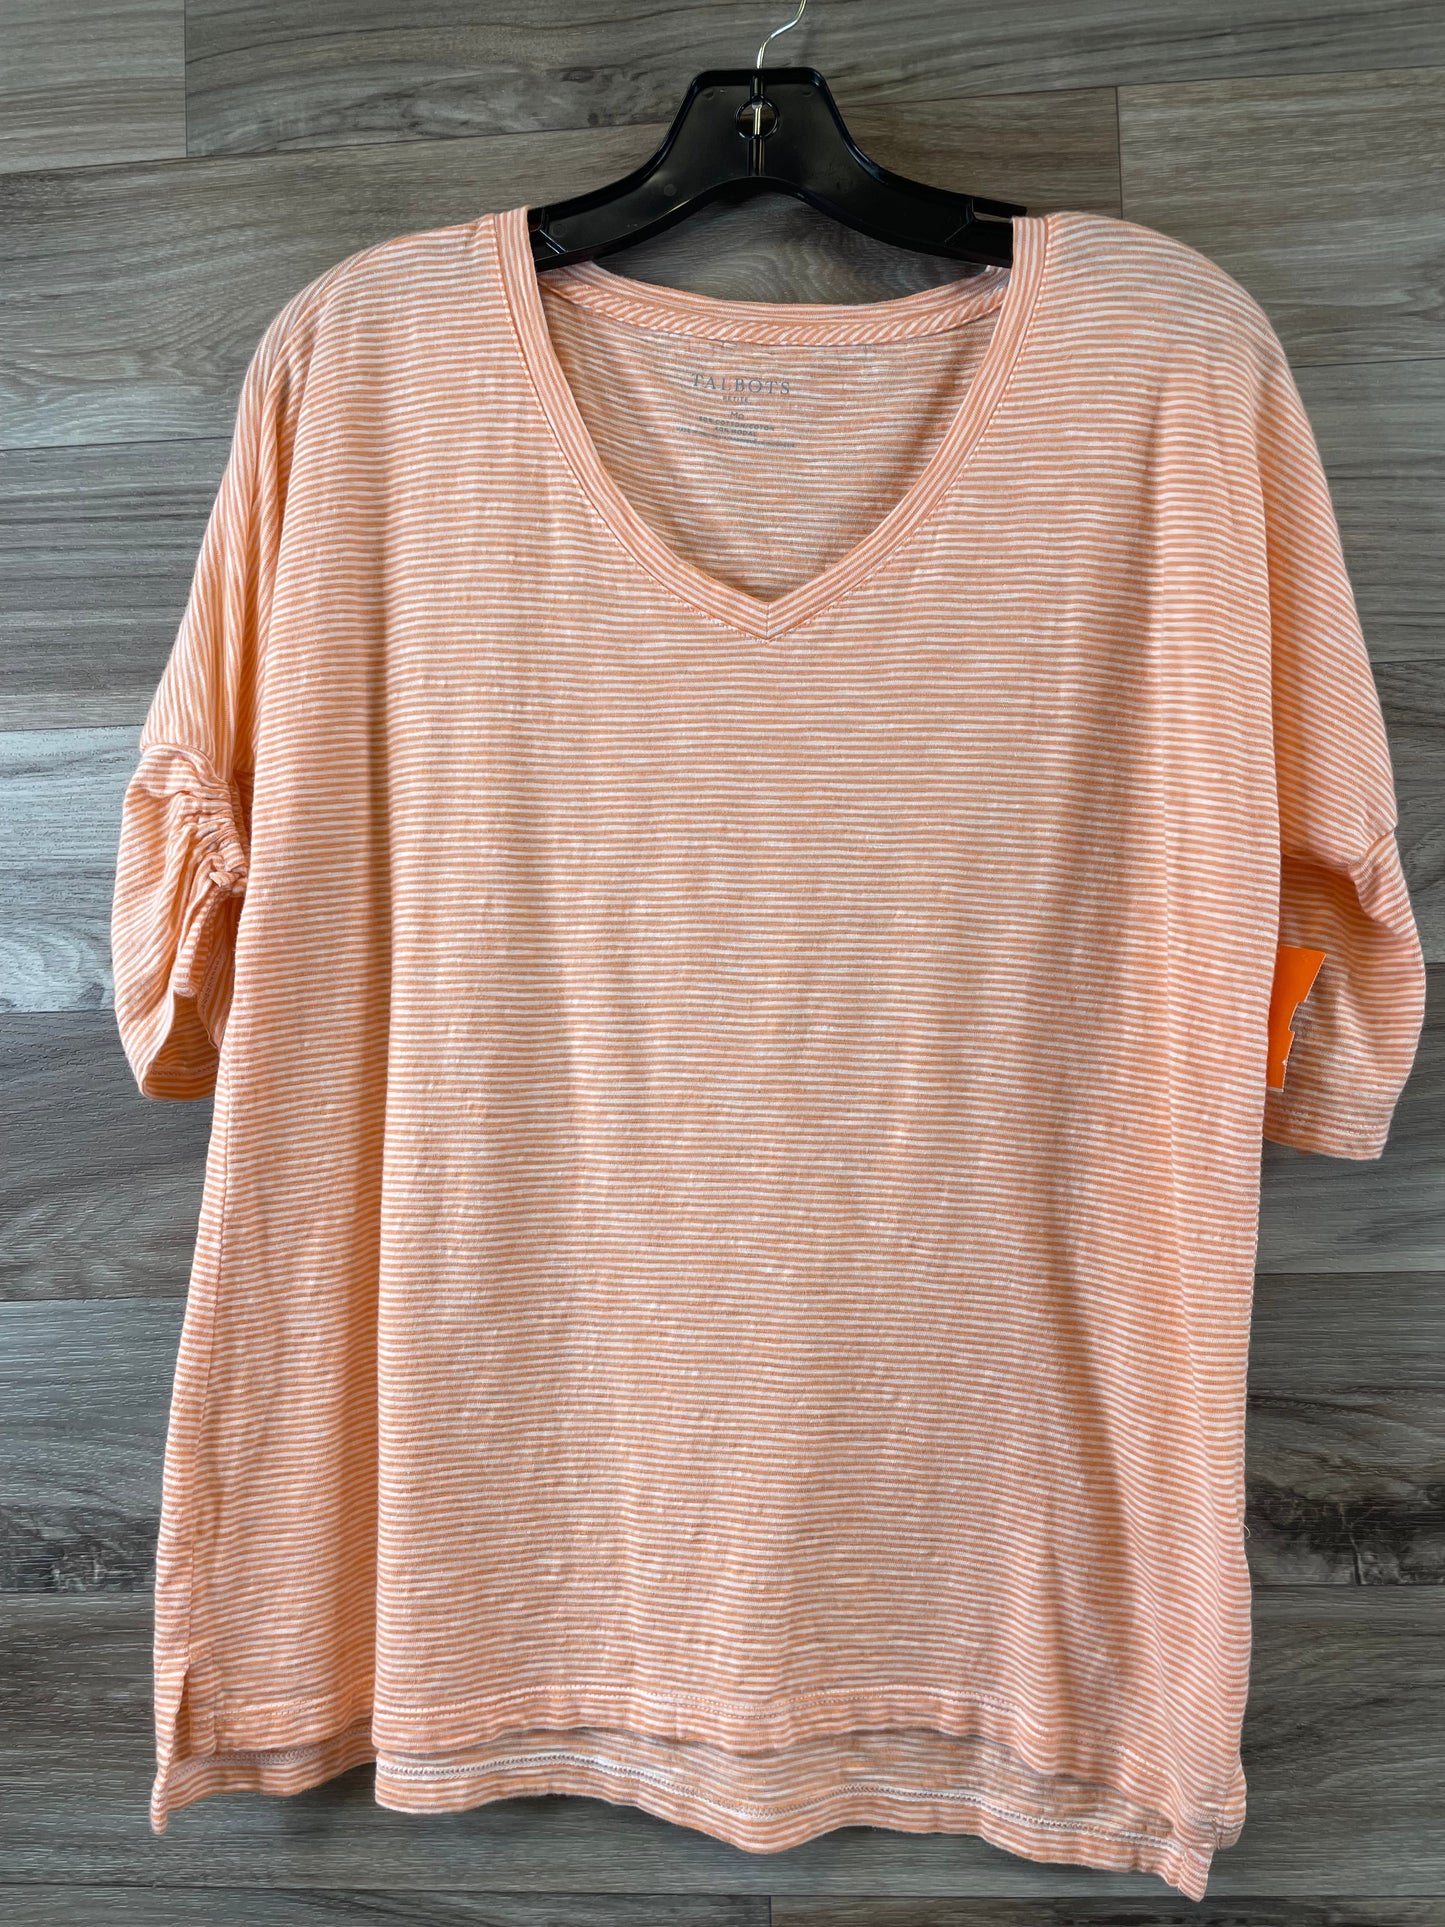 Top Short Sleeve Basic By Talbots  Size: Petite  M